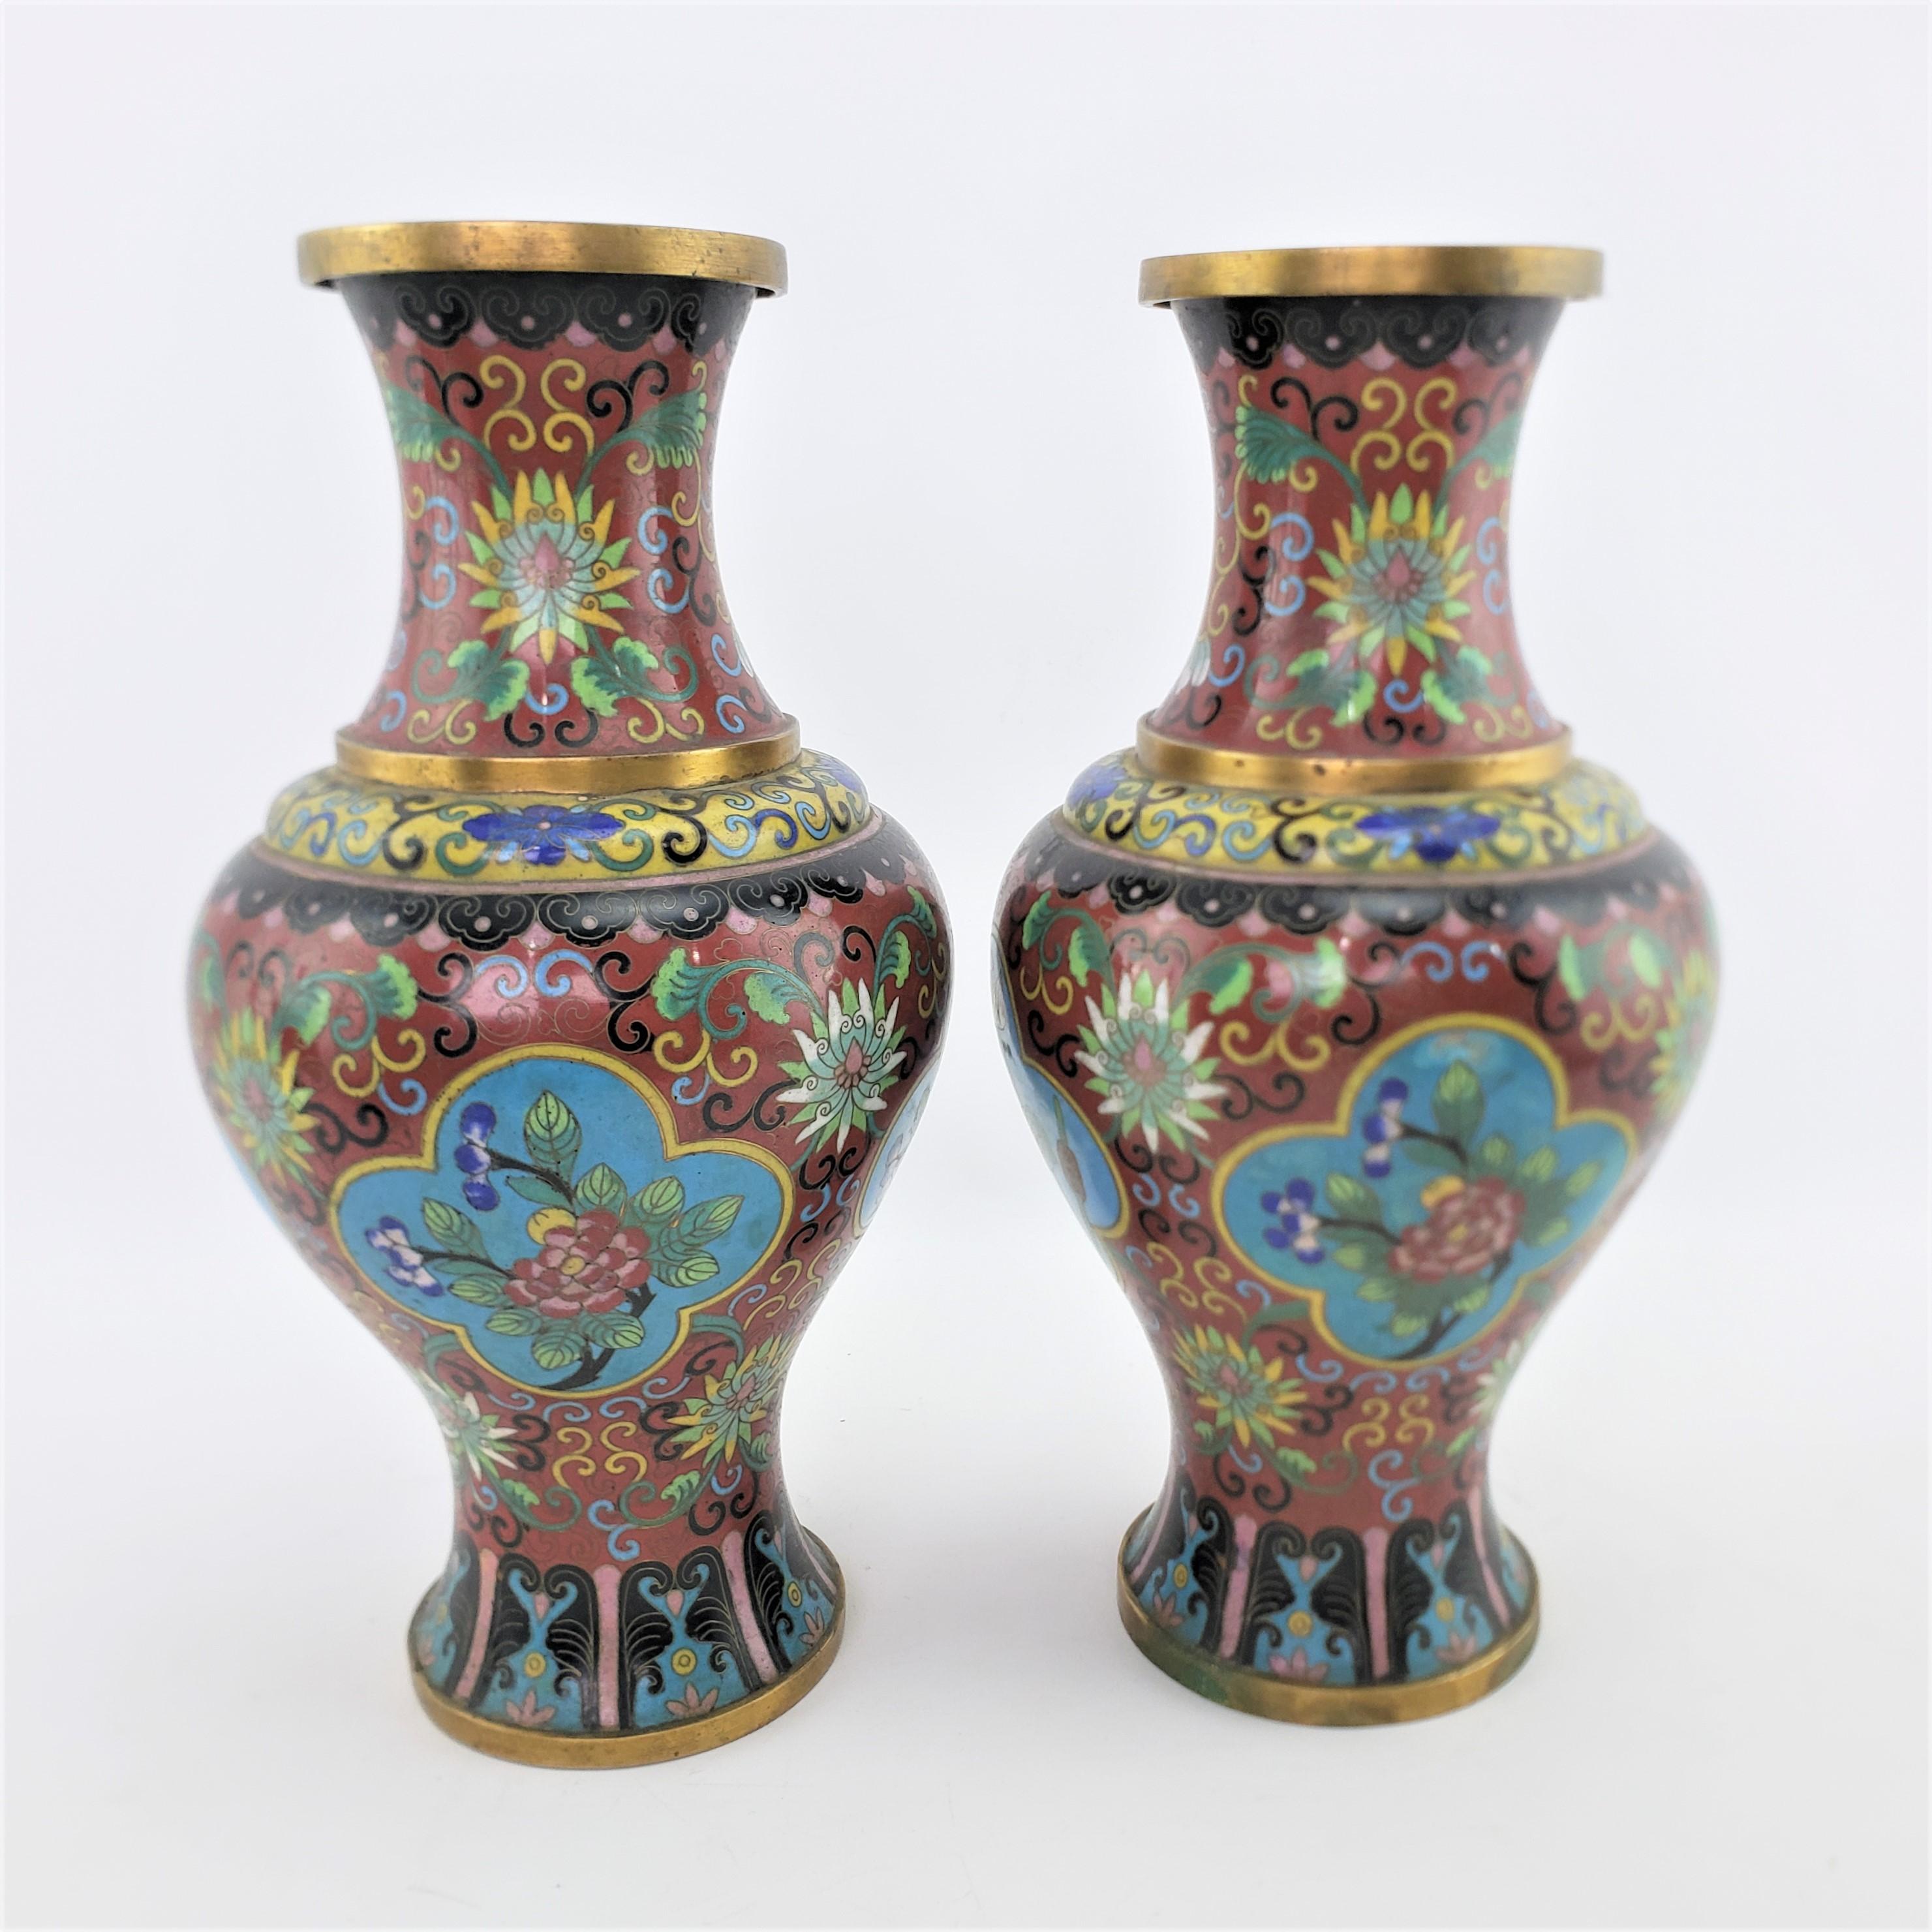 Brass Pair of Early Chinese Republic Era Cloisonne Vases with Stylized Floral Motif For Sale